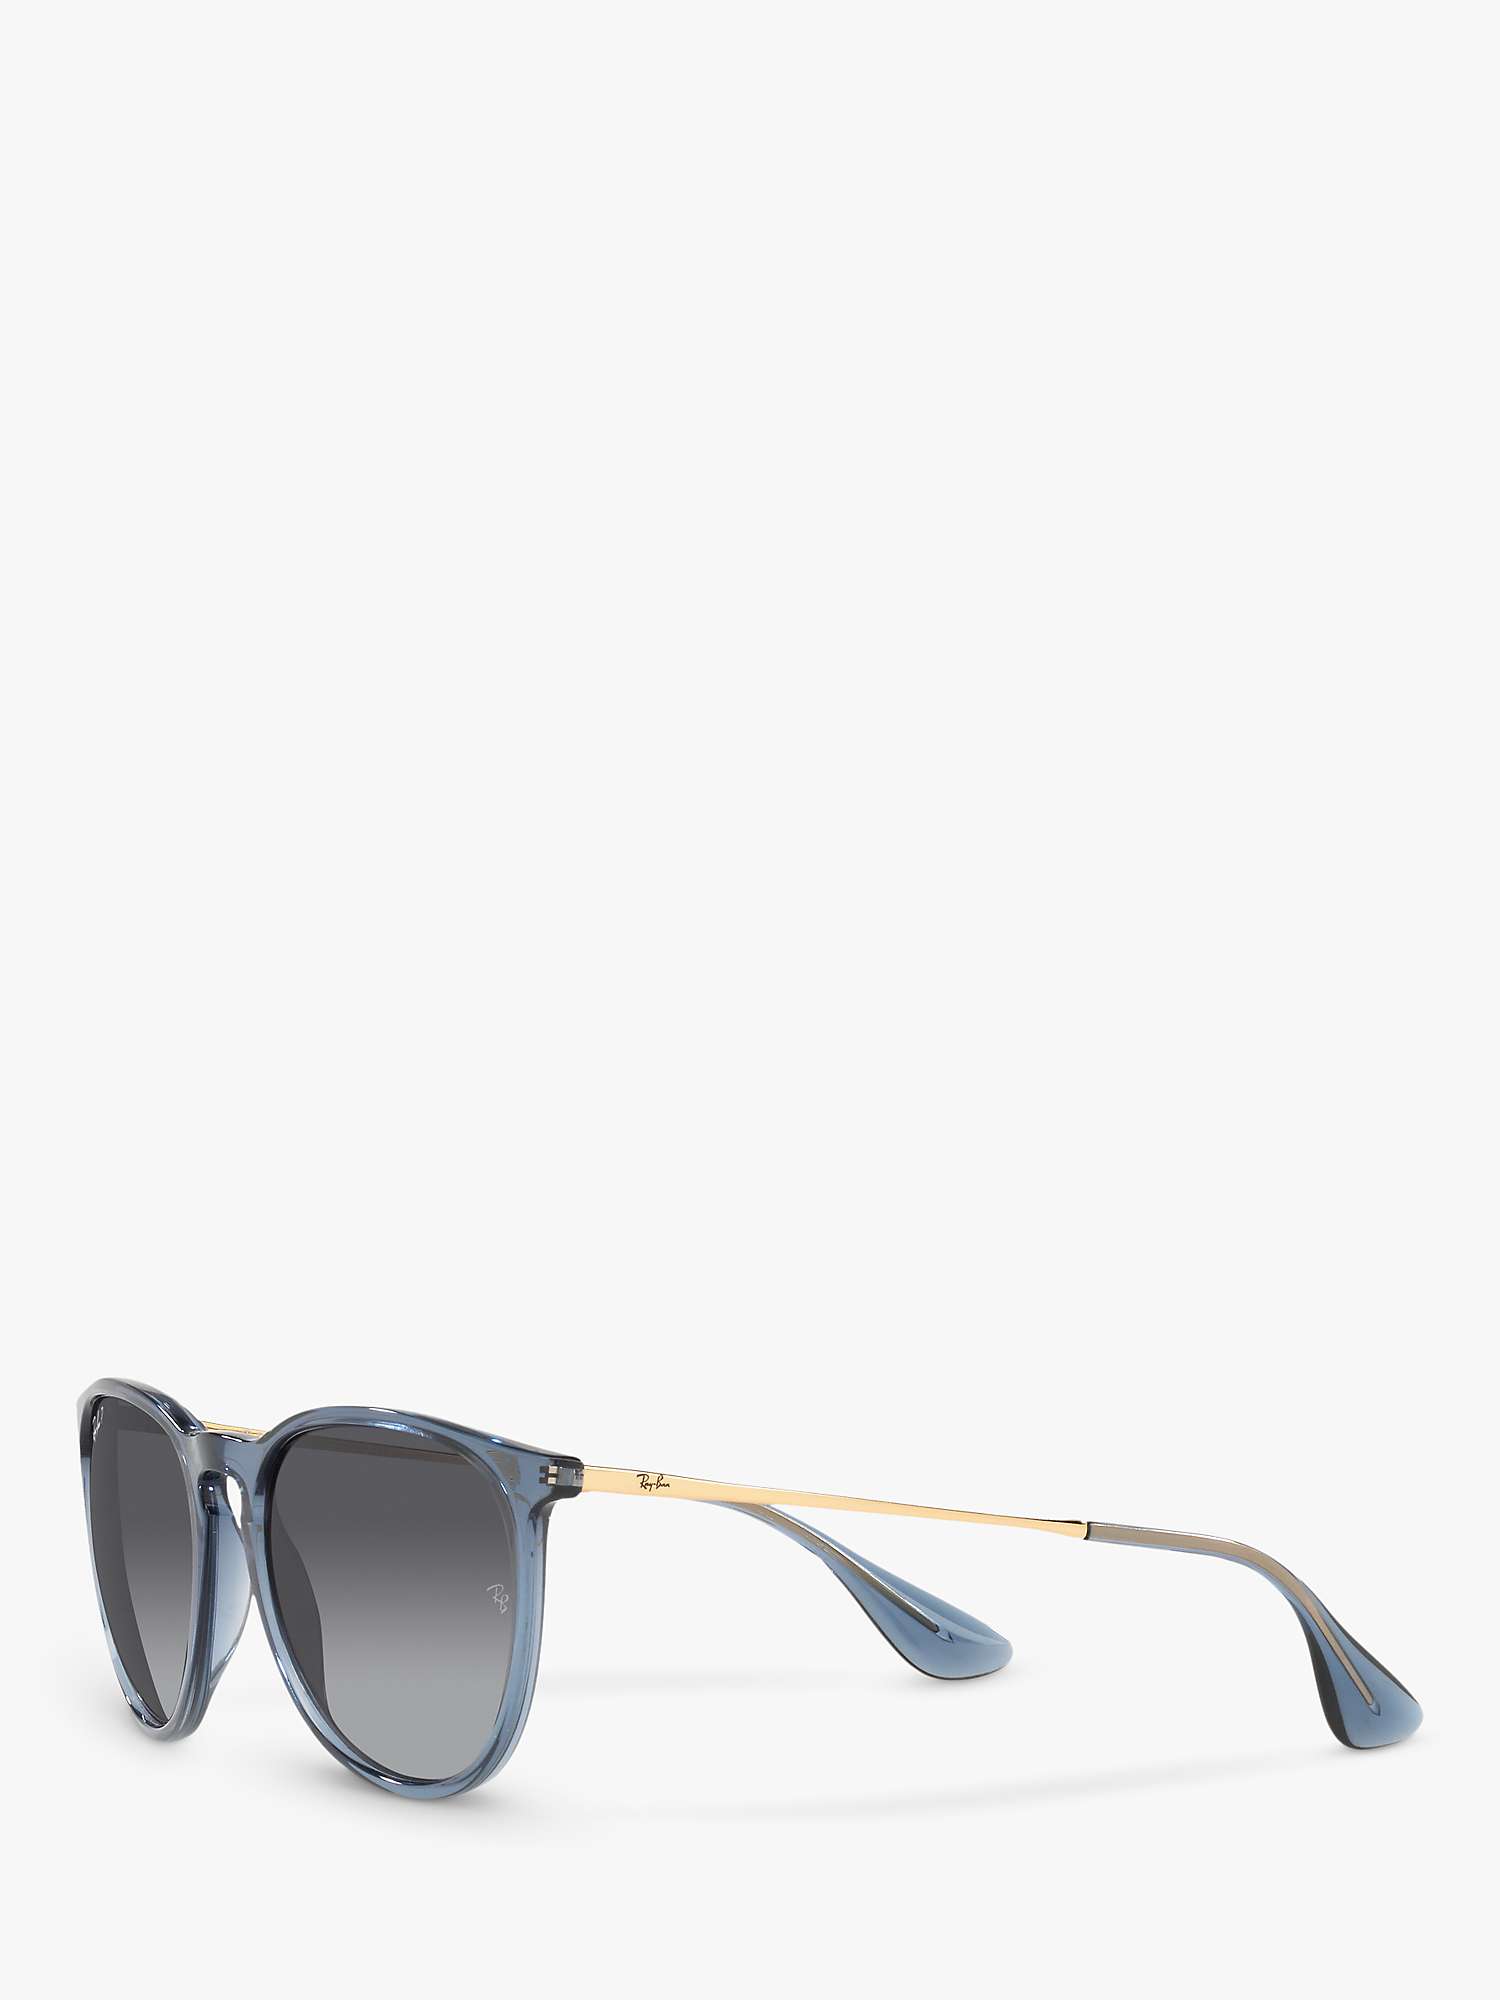 Buy Ray-Ban RB4171 Women's Erika Polarised Oval Sunglasses Online at johnlewis.com